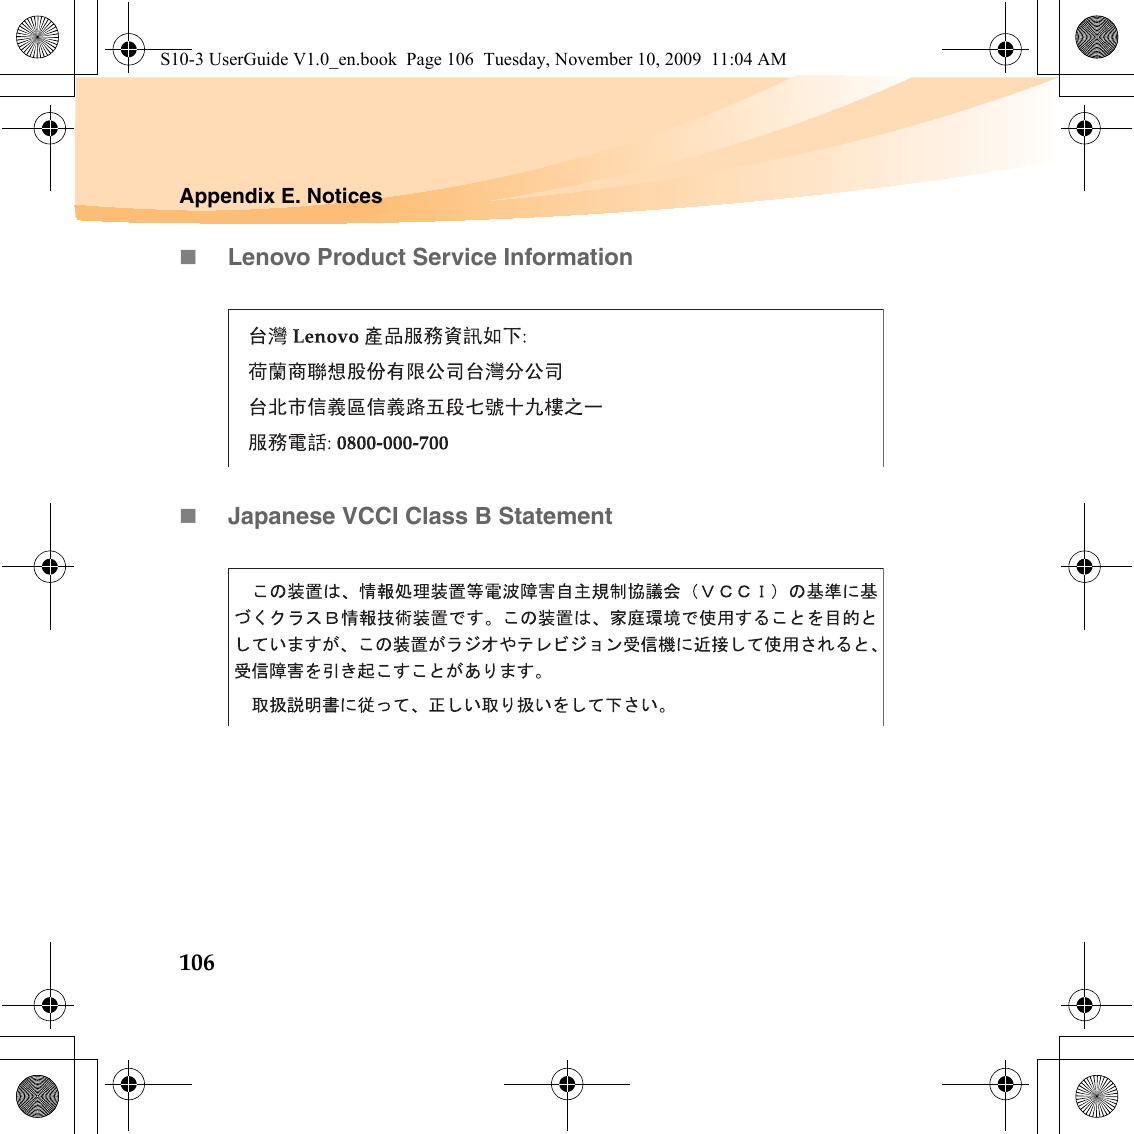 106Appendix E. NoticesLenovo Product Service InformationJapanese VCCI Class B StatementS10-3 UserGuide V1.0_en.book  Page 106  Tuesday, November 10, 2009  11:04 AM